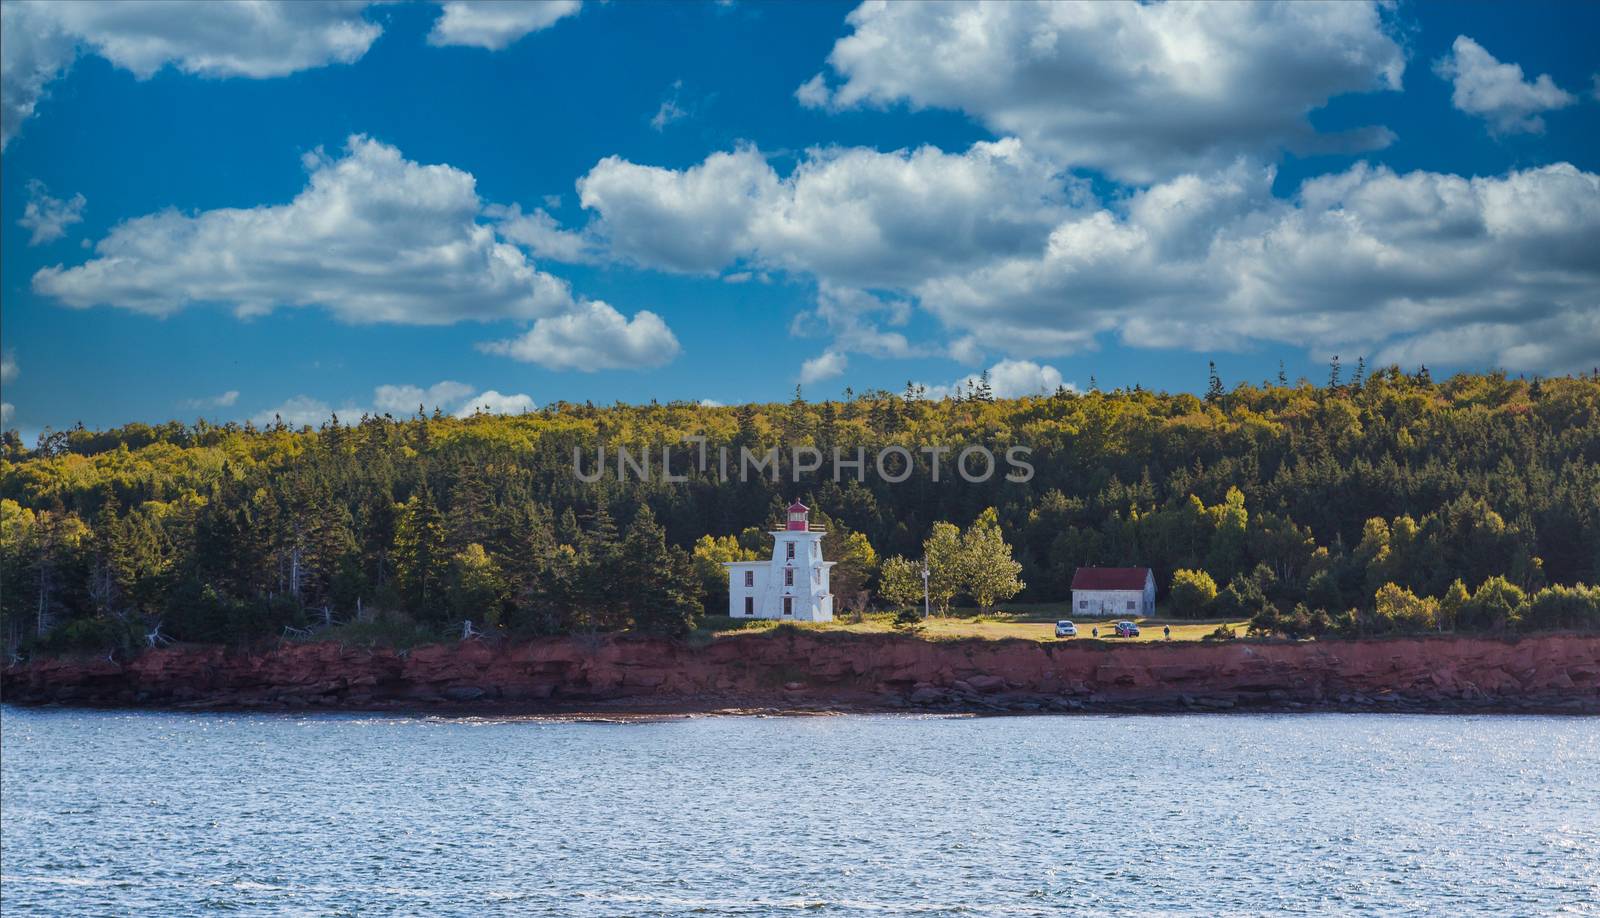 Old lighthouse on the coast of Prince Edward Island in Canada